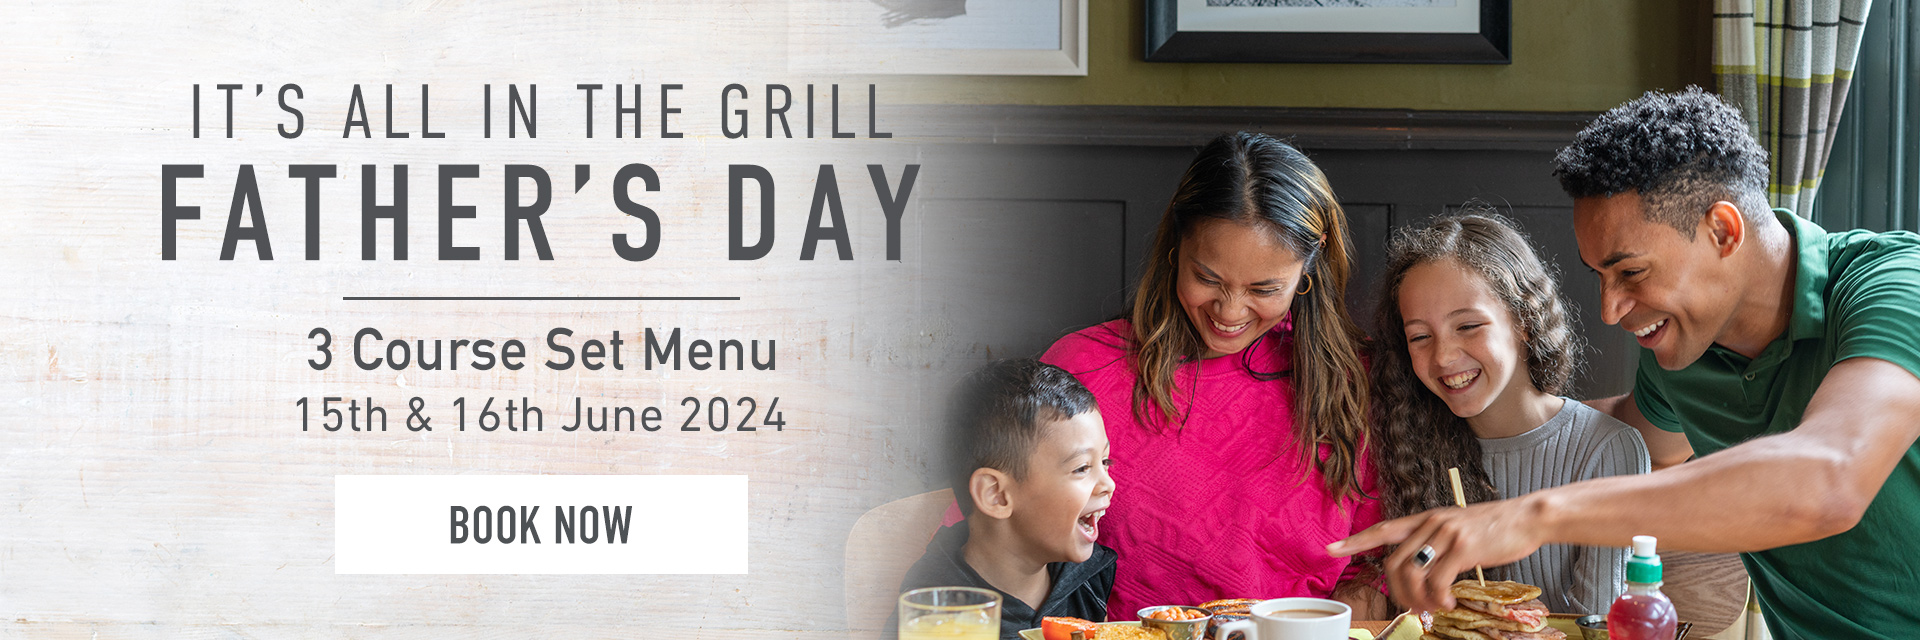 Father’s Day at Harvester Hillington